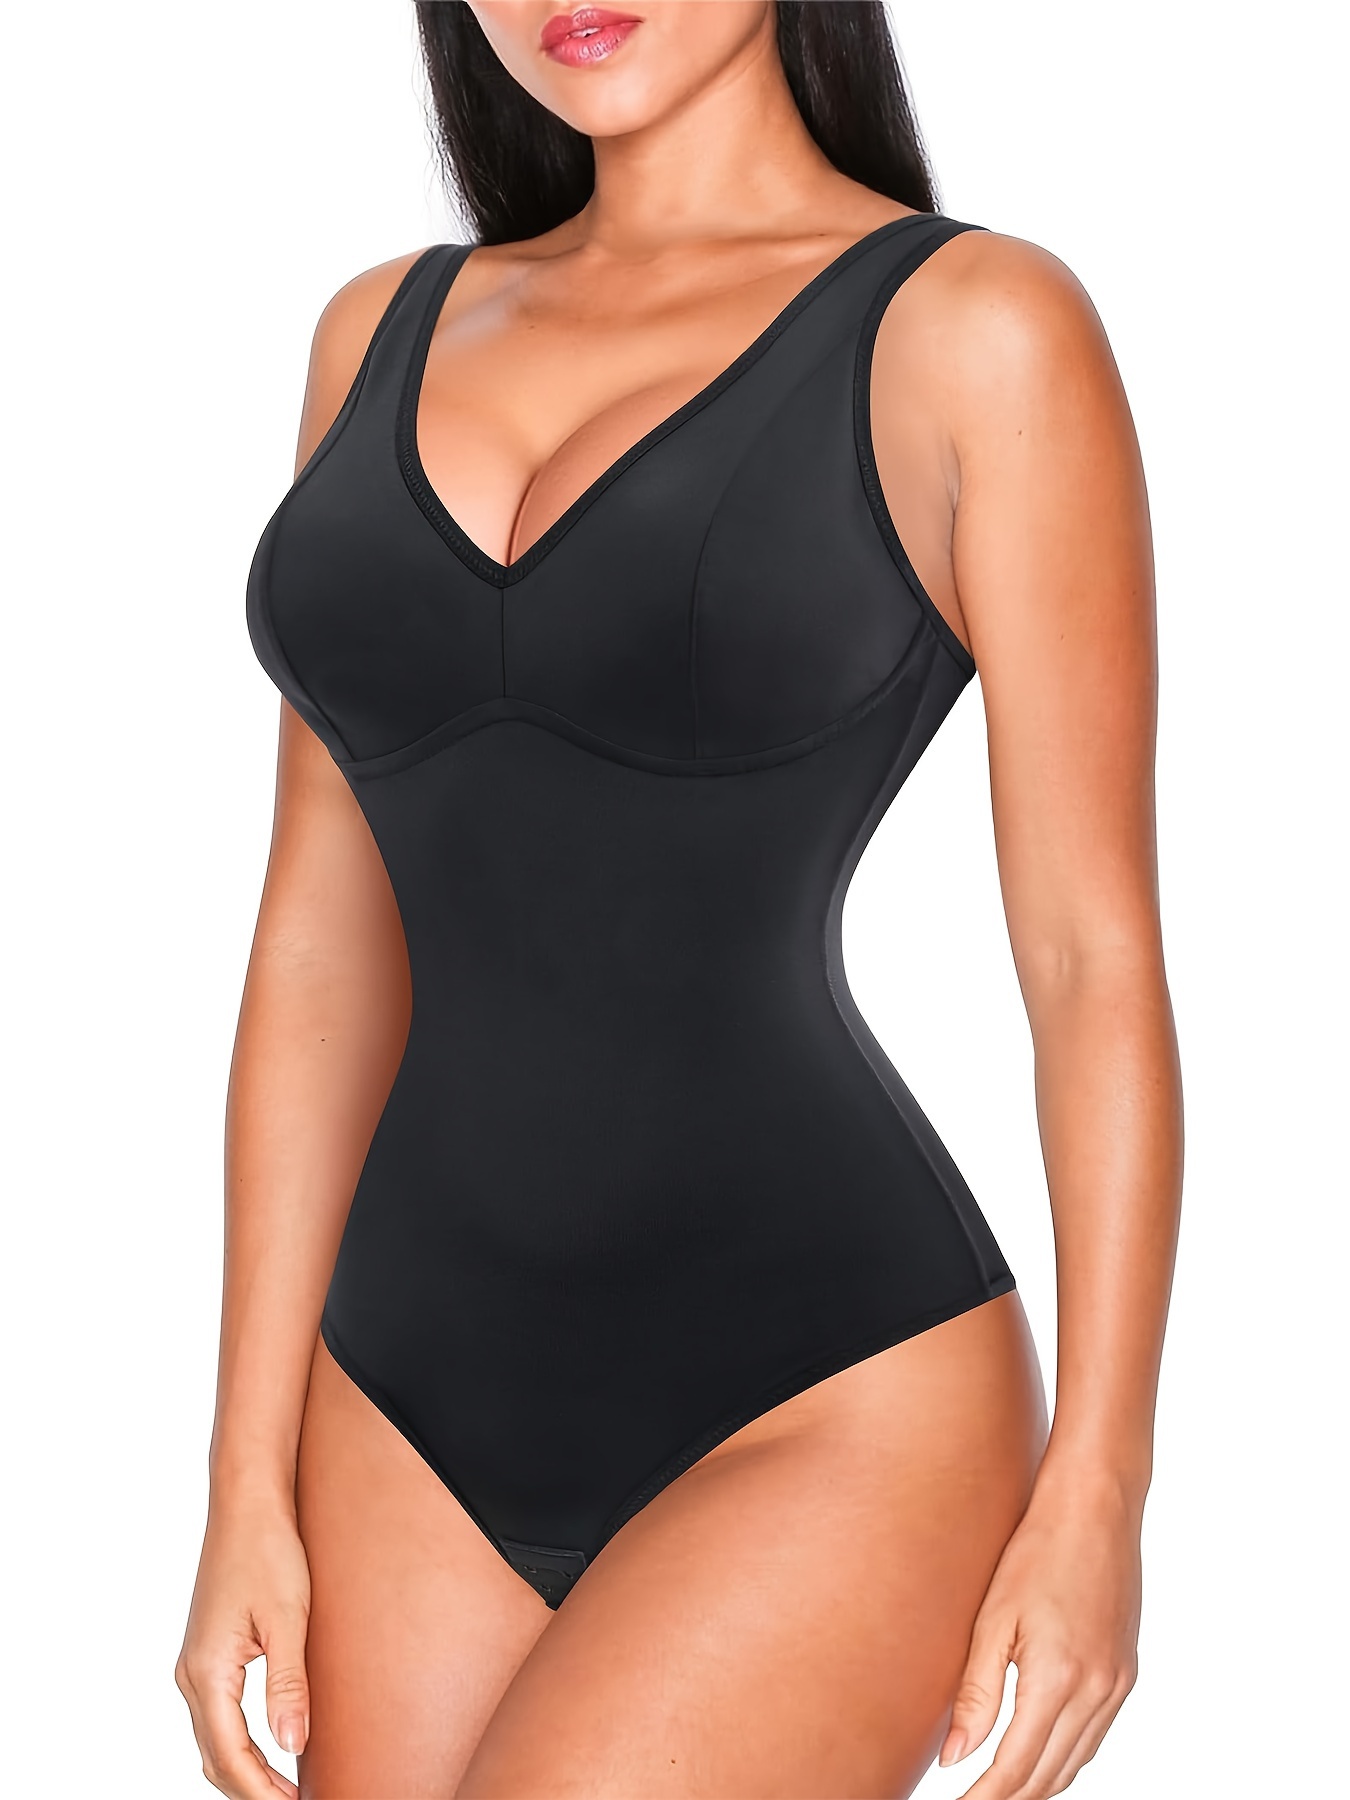  DIVASTORY Shapewear Bodysuit for Women: Tummy Control  Sleeveless Tops Seamless Thong Body Shaper Camisole Jumpsuit : Clothing,  Shoes & Jewelry